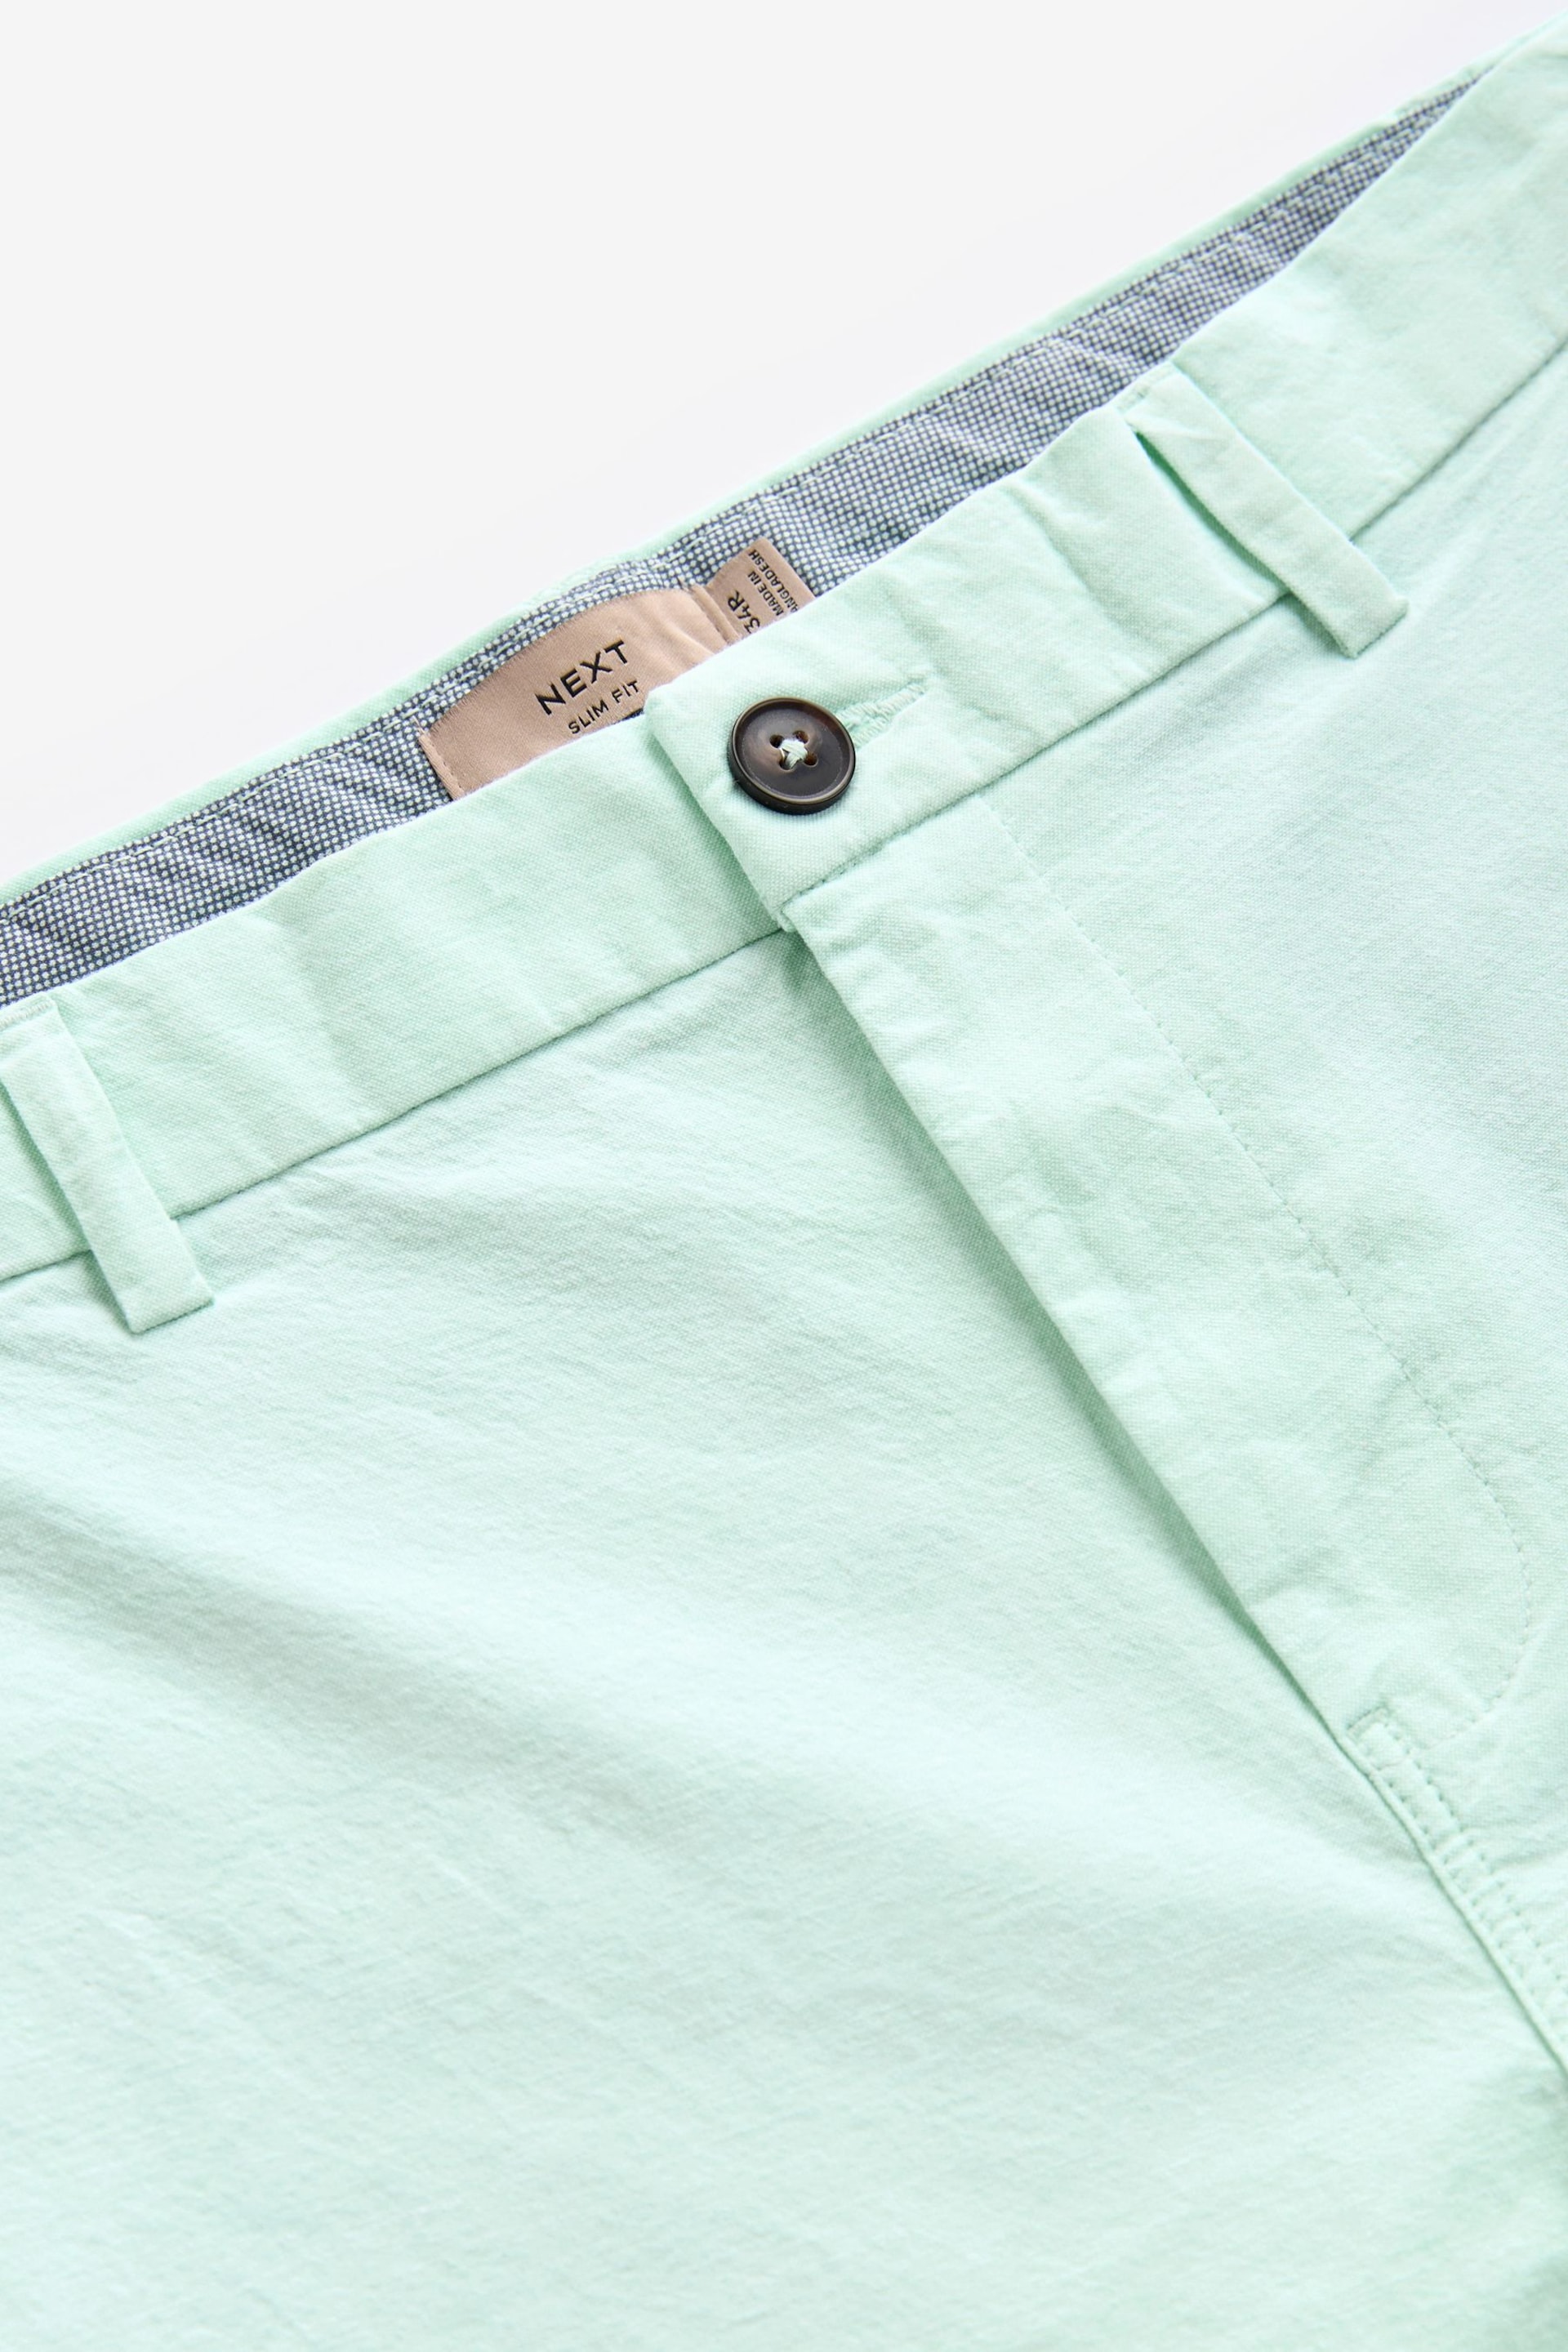 Mint Green Slim Fit Stretch Chinos Shorts - Image 6 of 8